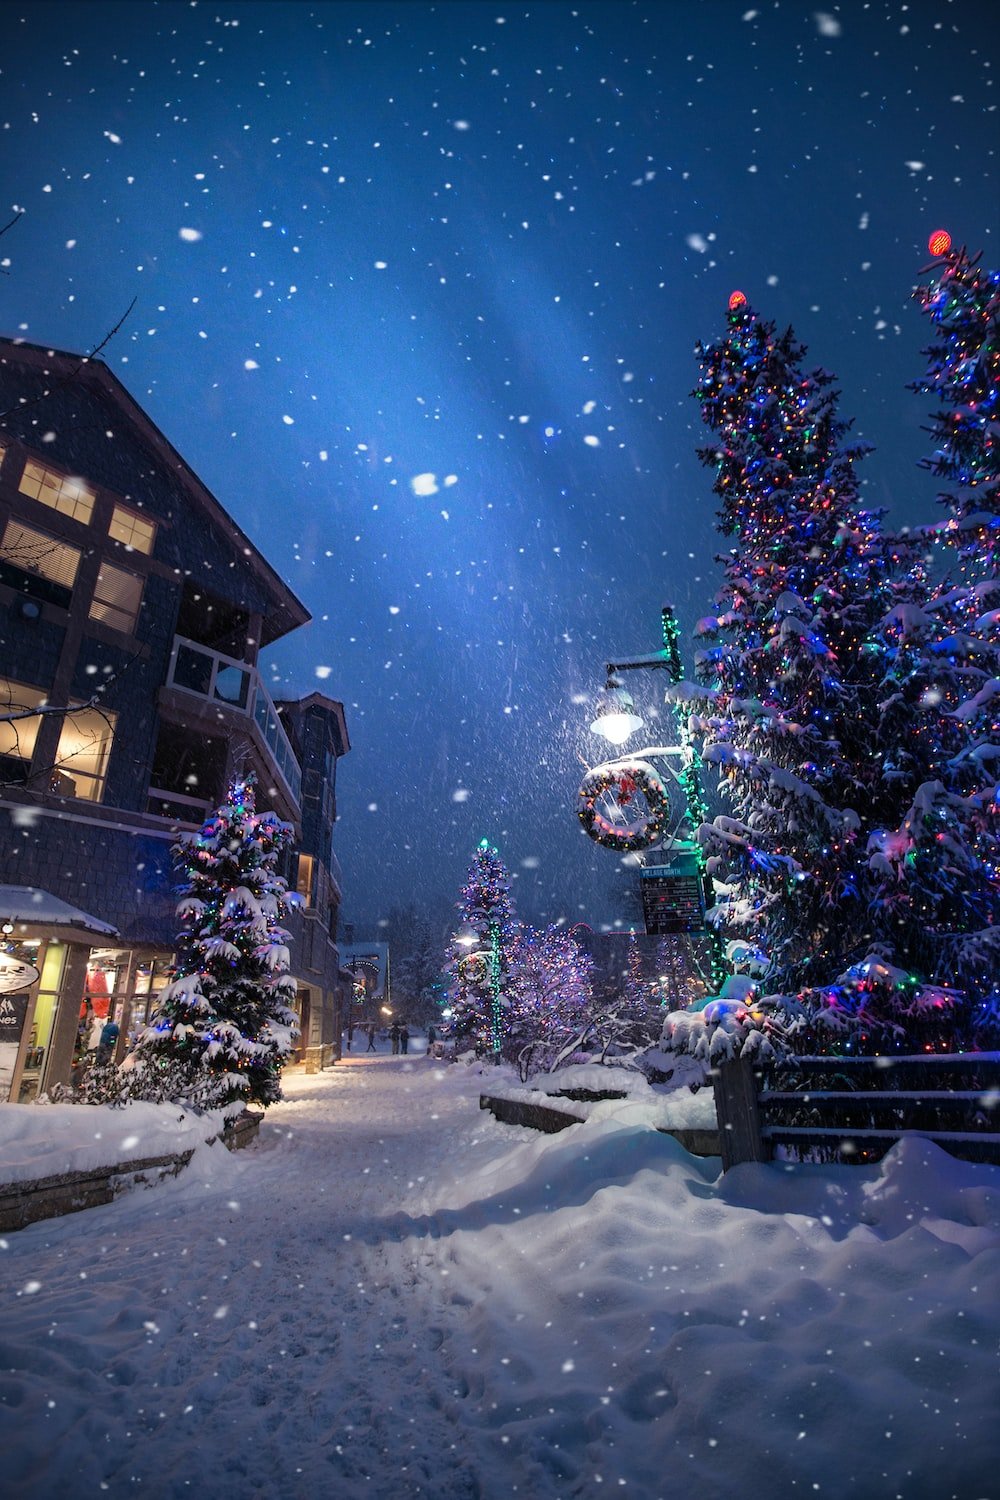 Christmas Village Picture. Download Free Image